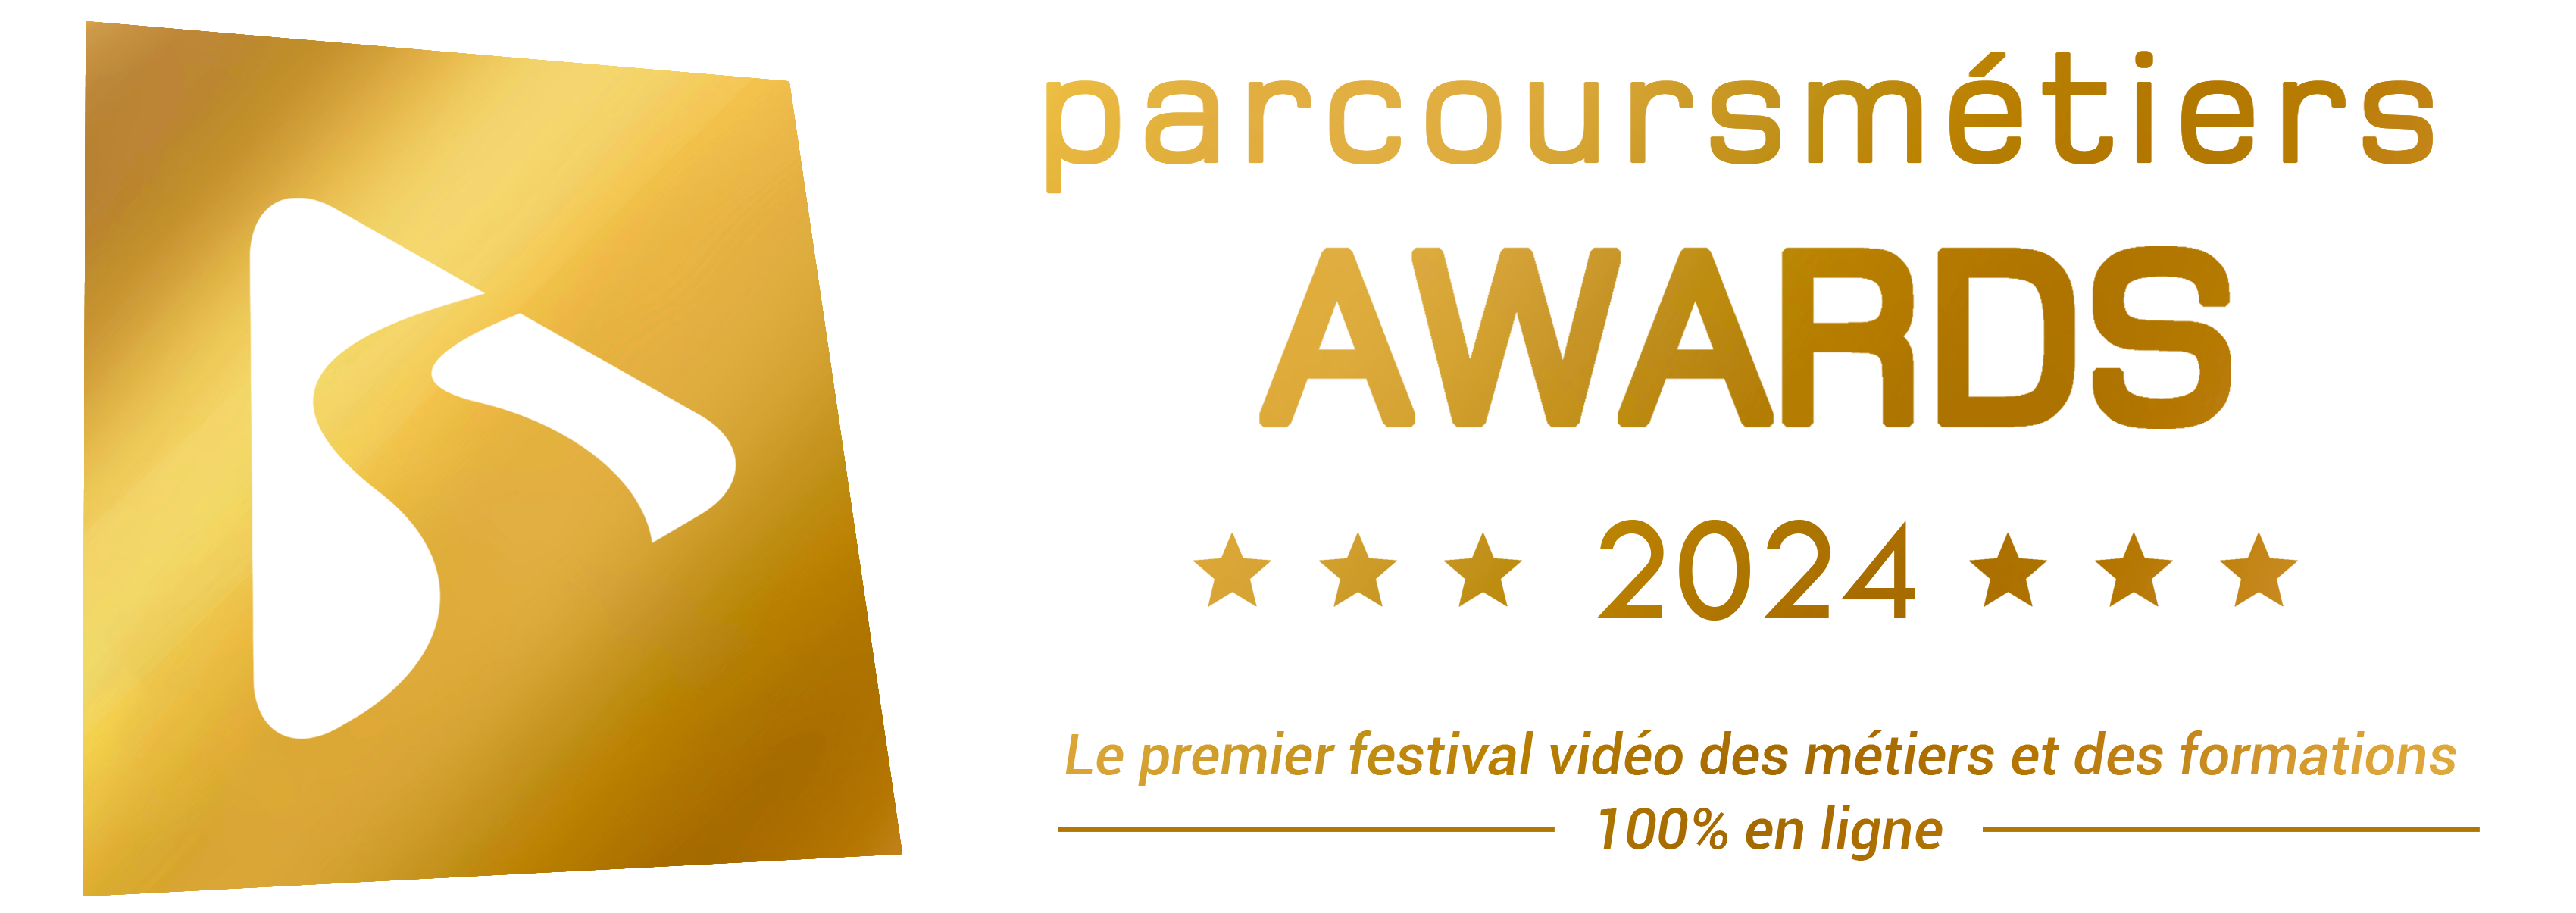 Parcoursmetiers awards 2024